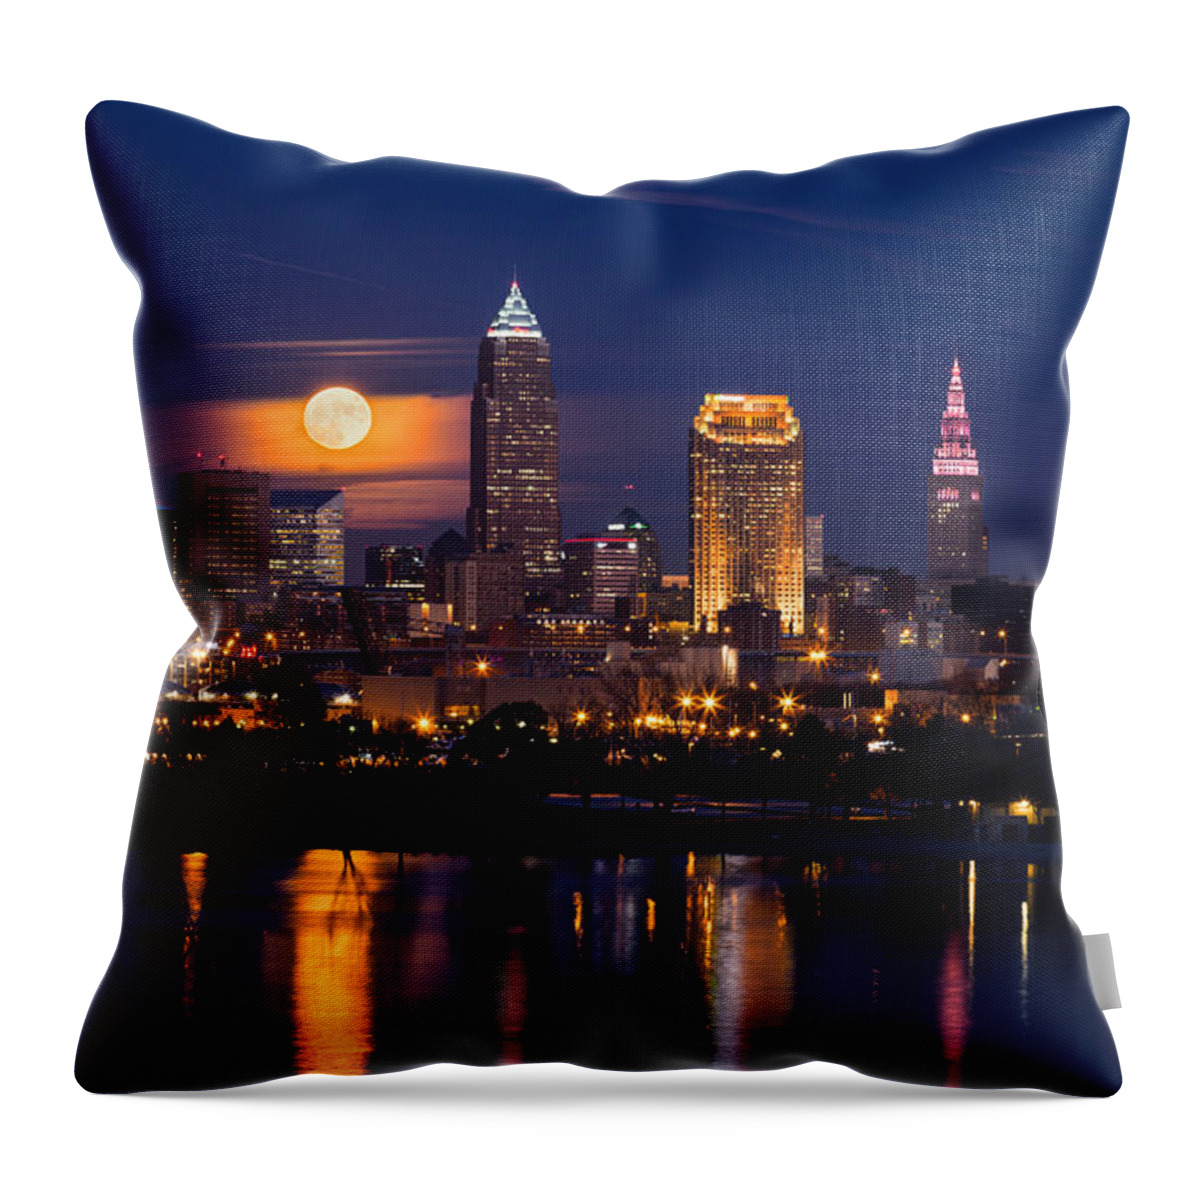 Full Moonrise Over Cleveland Throw Pillow featuring the photograph Full Moonrise Over Cleveland by Dale Kincaid